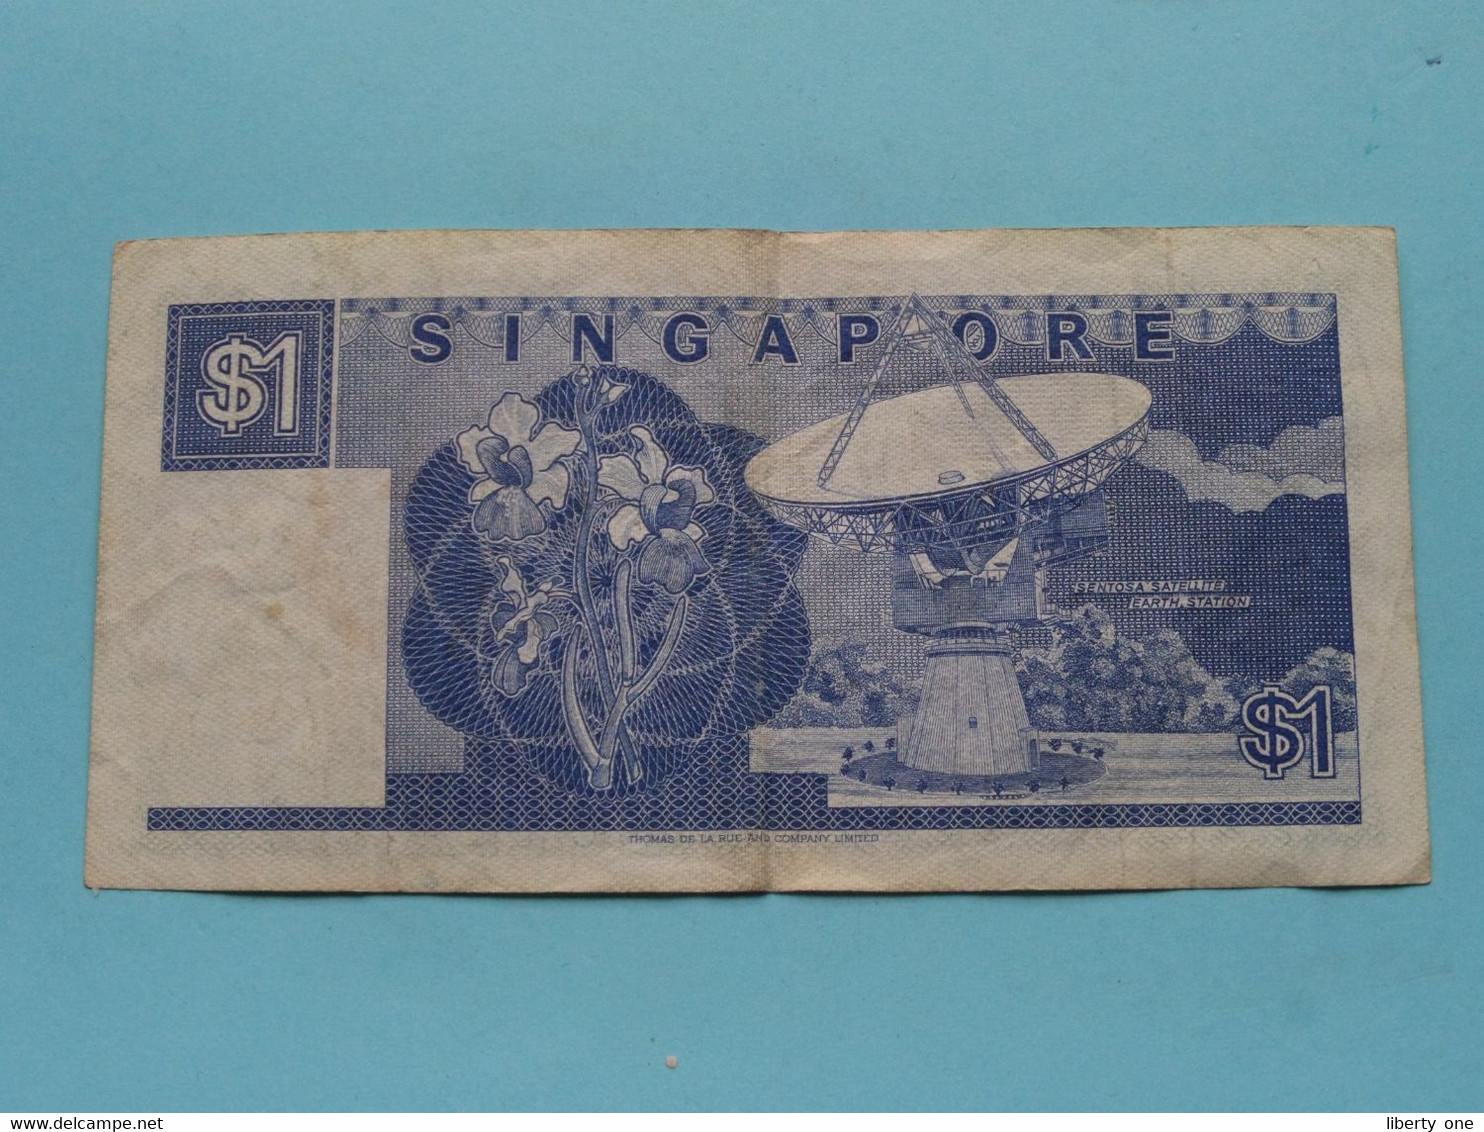 1 $ > Singapore One Dollar - A32 255136 ( For Grade, Please See Photo ) Used ! - Singapour